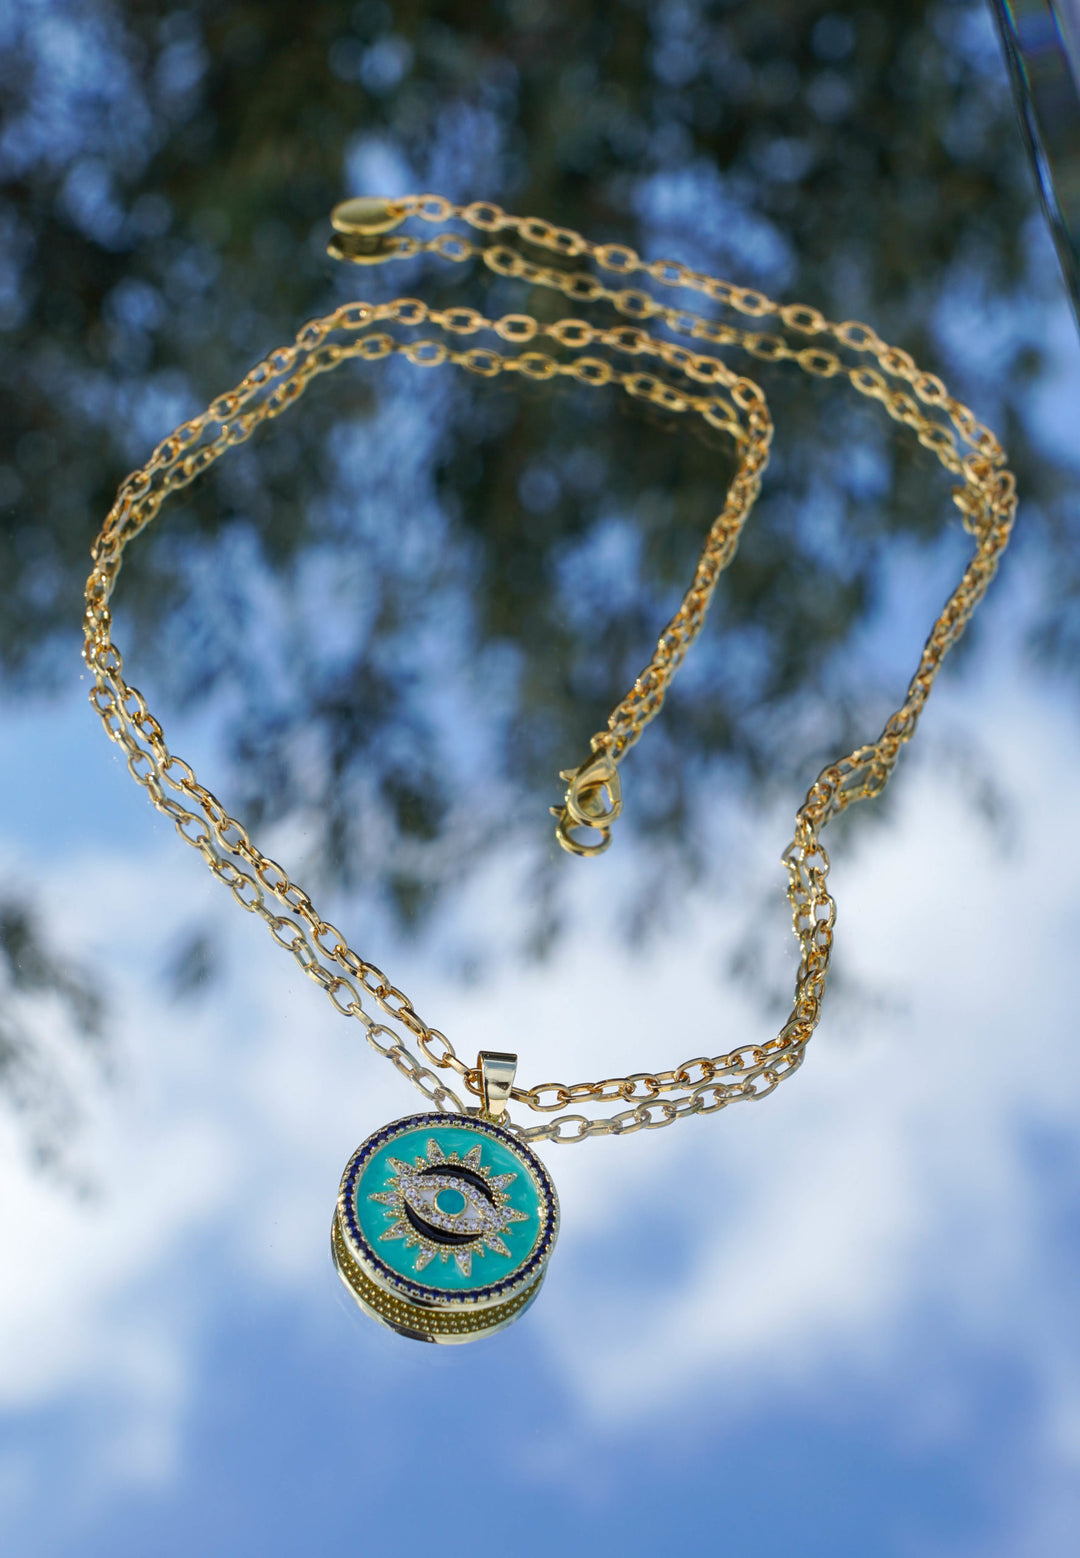 Necklace Get Lucky Turquoise Eye - مجوهرات